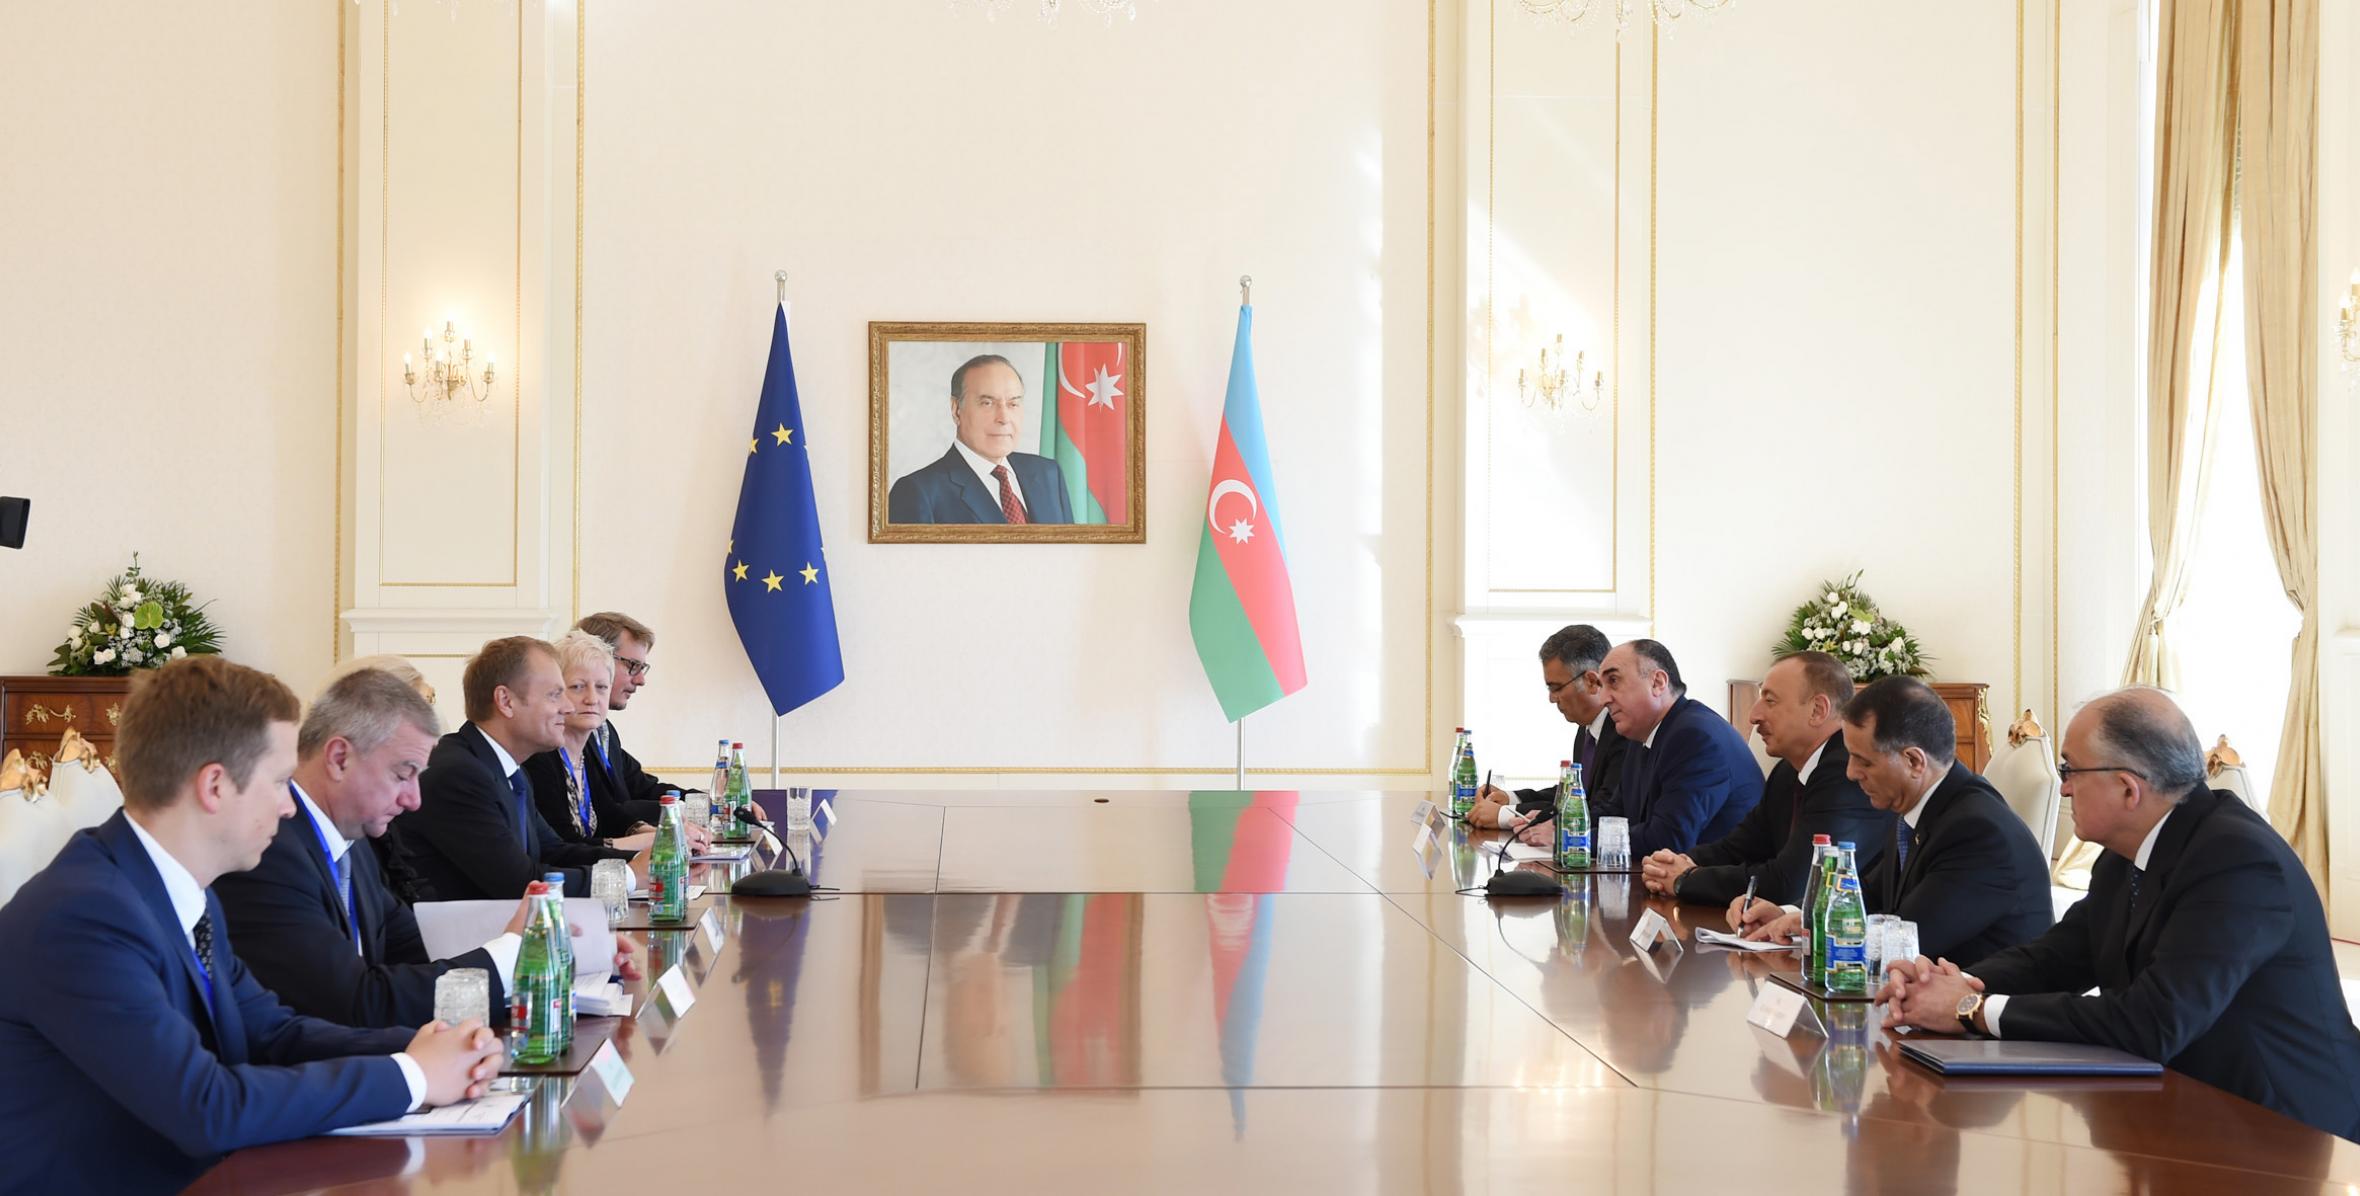 Ilham Aliyev and President of the European Council Donald Tusk held an expanded meeting